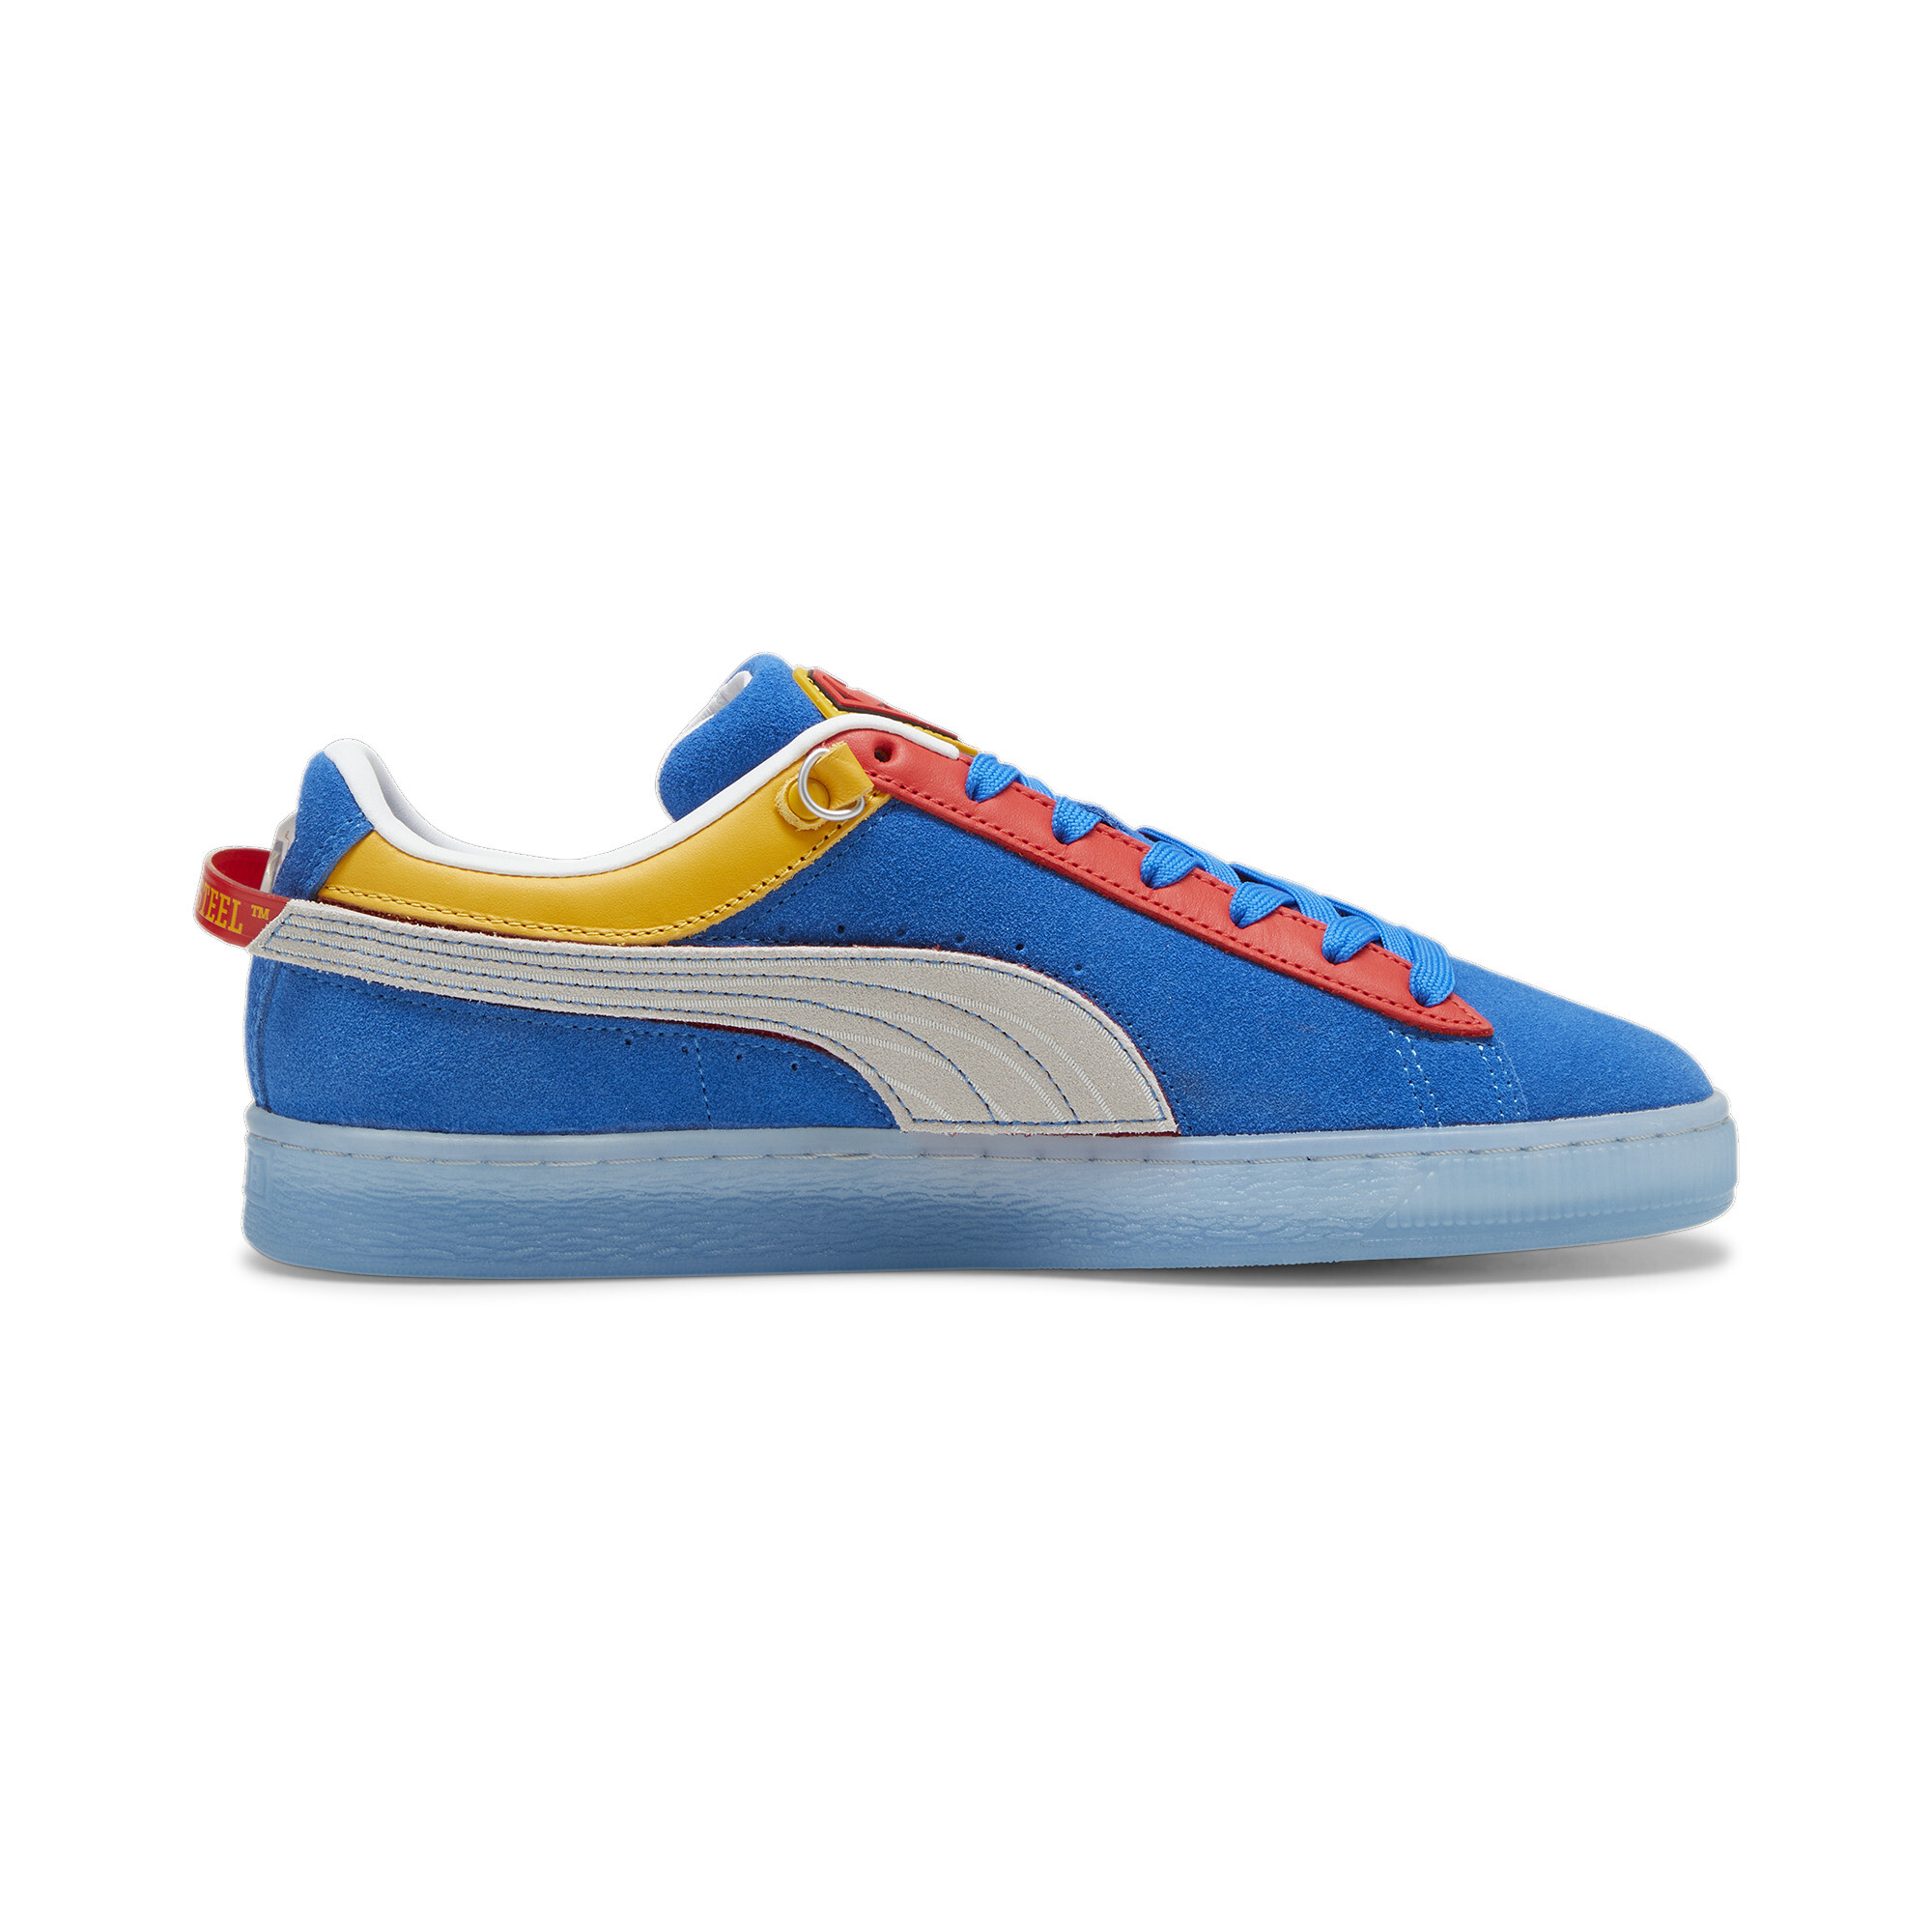 Puma X SUPERMAN 85th Anniversary Suede Sneakers, Blue, Size 38, Shoes